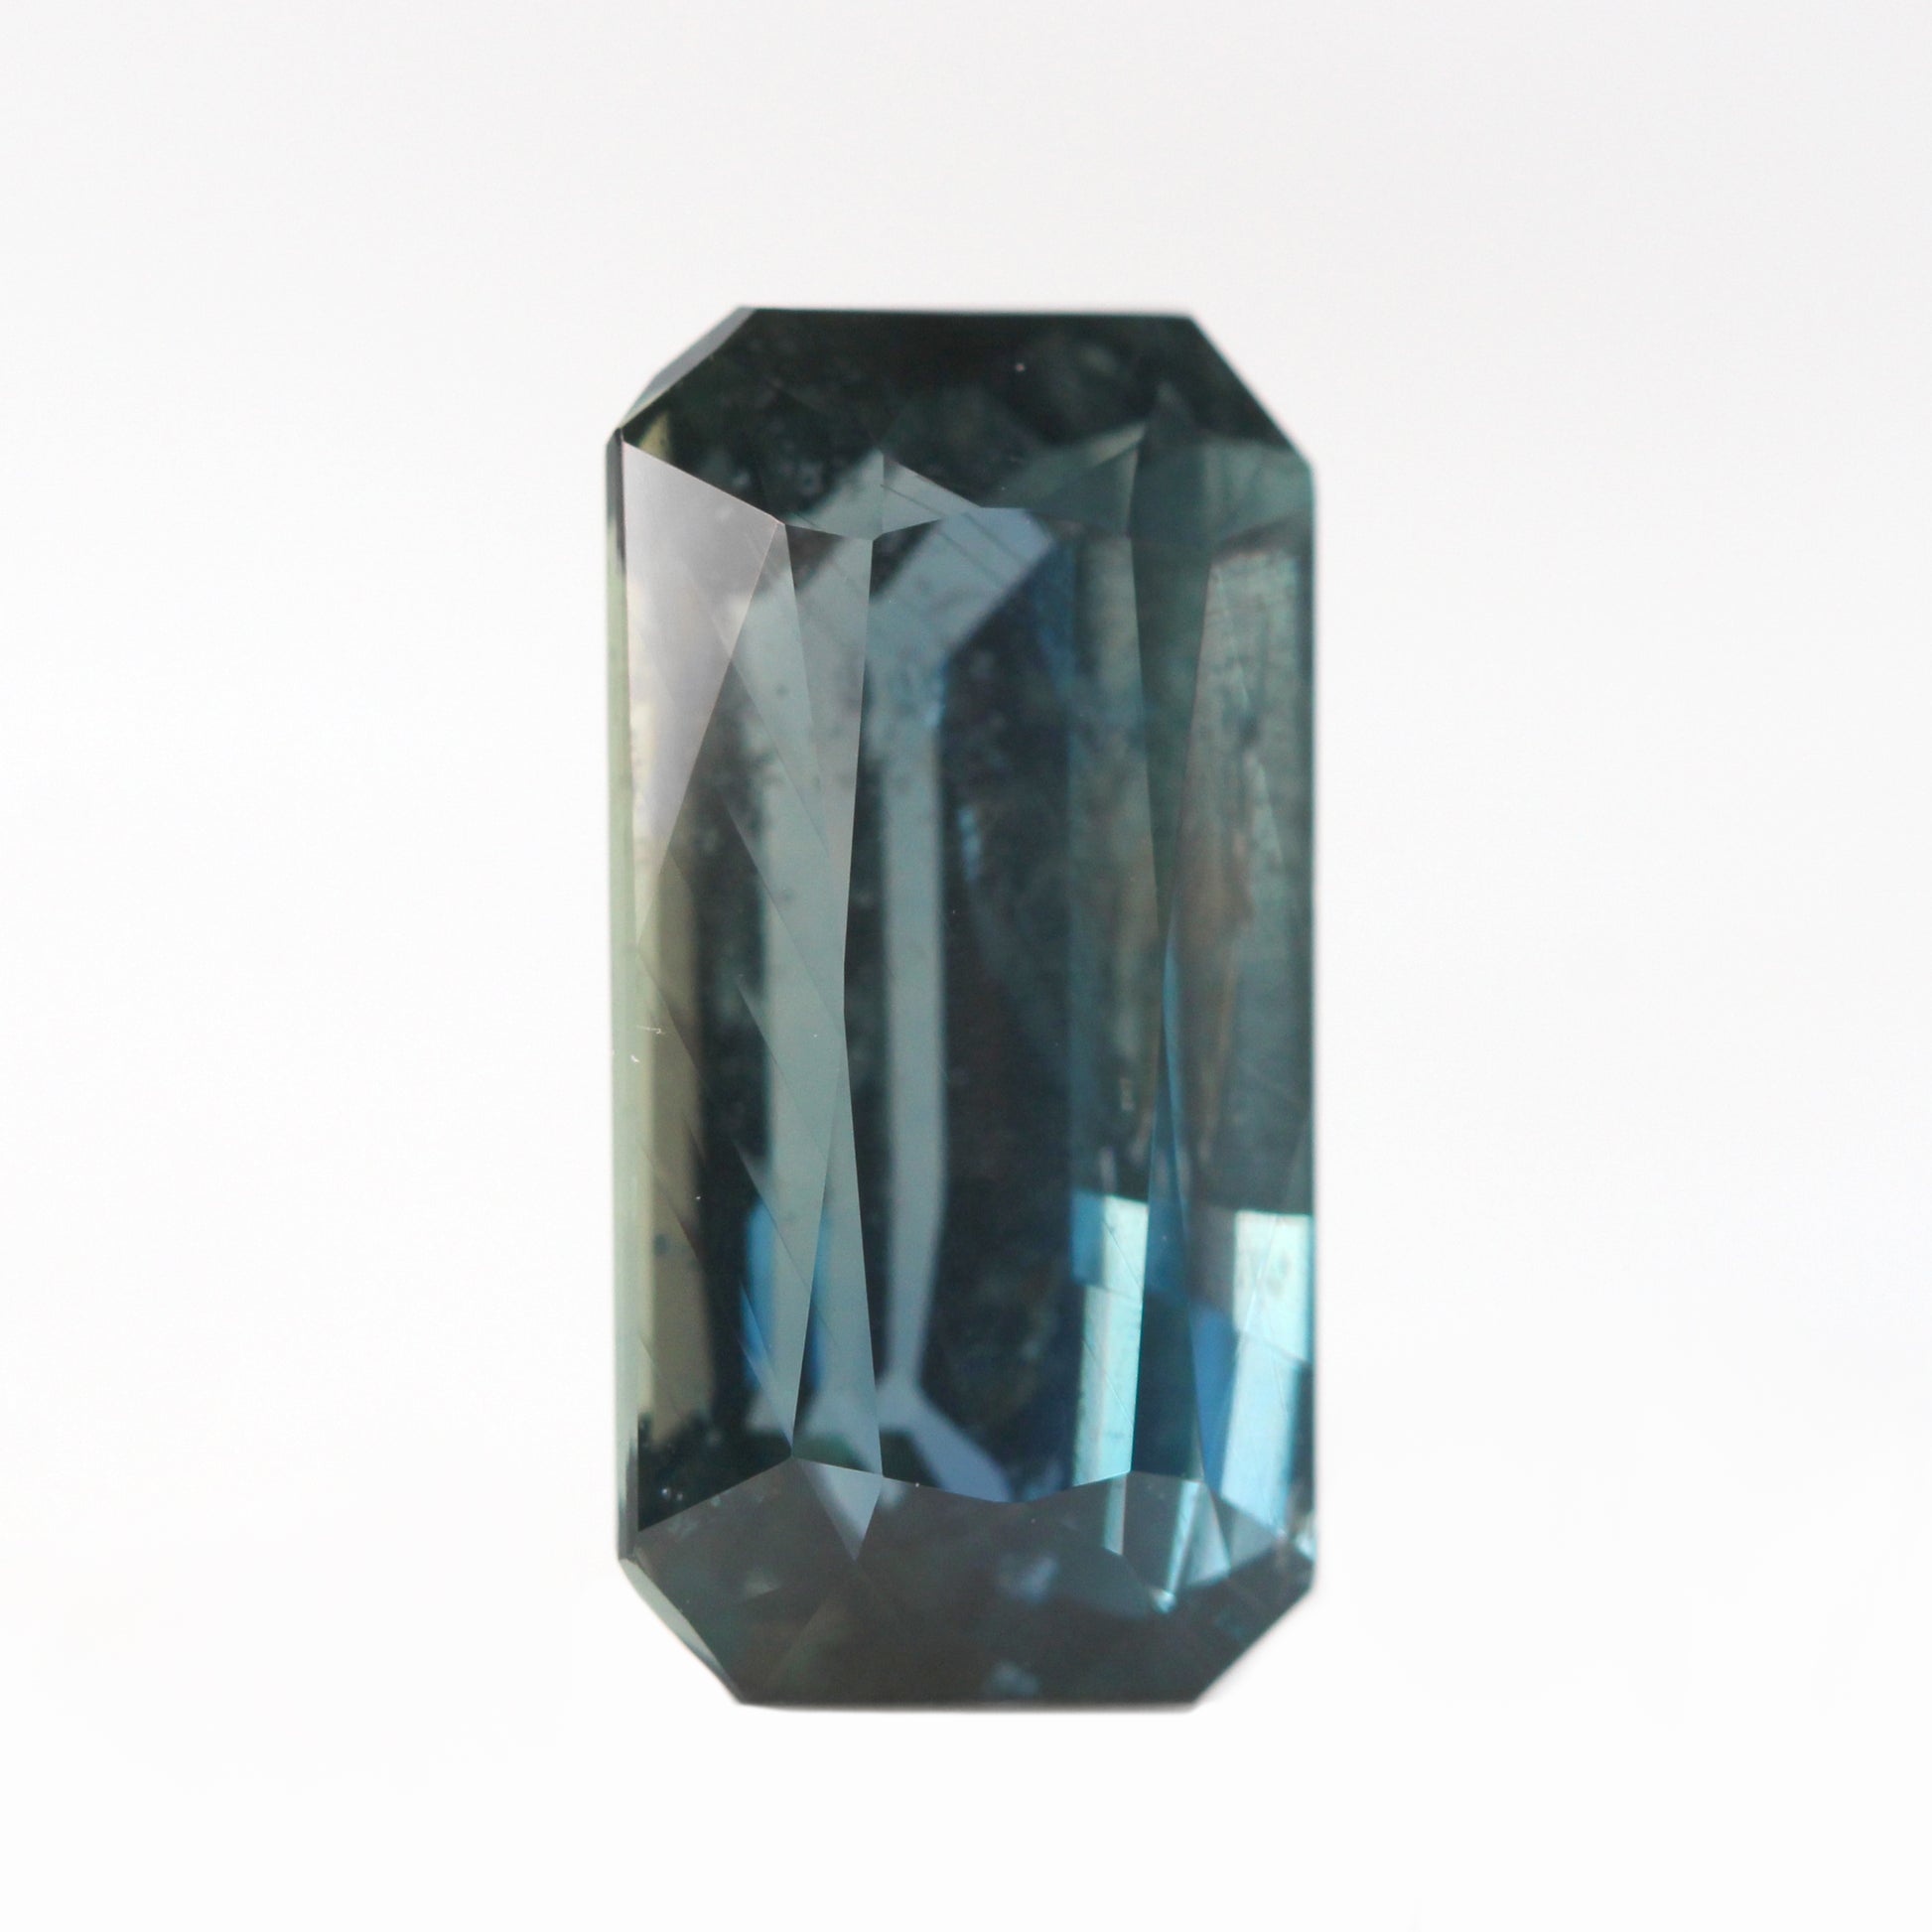 6.00 Carat Emerald Cut Dark Teal Sapphire for Custom Work - Inventory Code TES599 - Midwinter Co. Alternative Bridal Rings and Modern Fine Jewelry